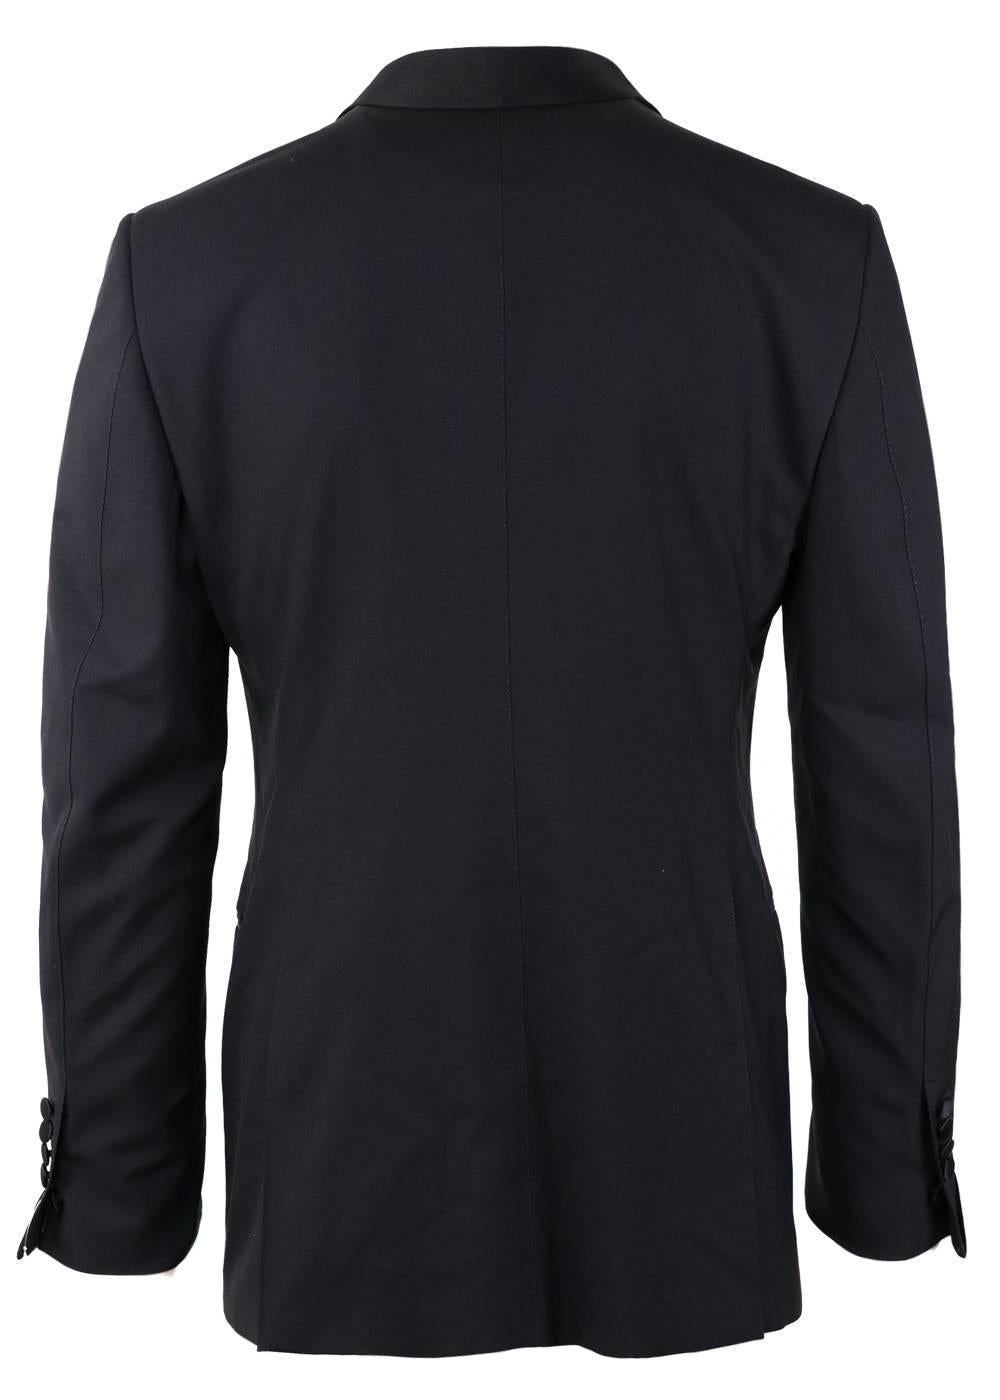 The signature Tom Ford Shelton Jacket updated in a breathable cotton base. This light constructed jacket is finished with notch lapels and patched pockets. This jacket is the perfect for the incoming spring/summer season with its lightweight